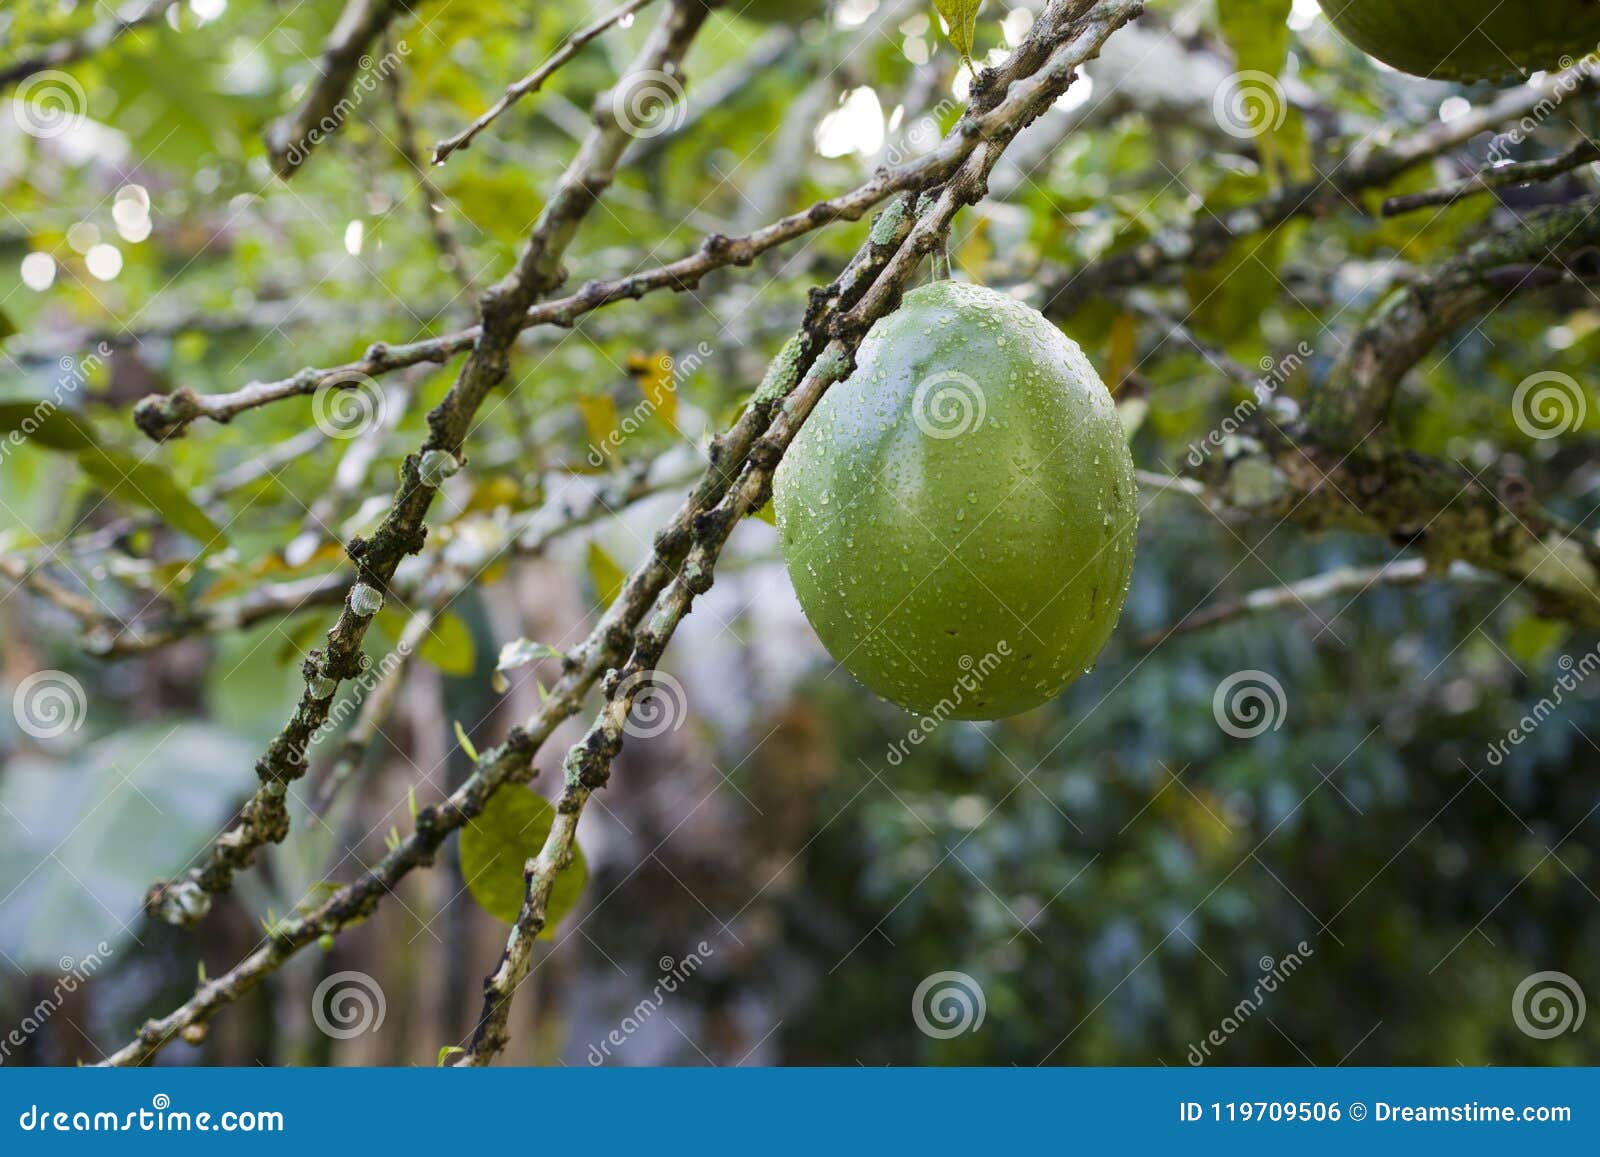 crescentia cujete, commonly known as the calabash tree big fruit